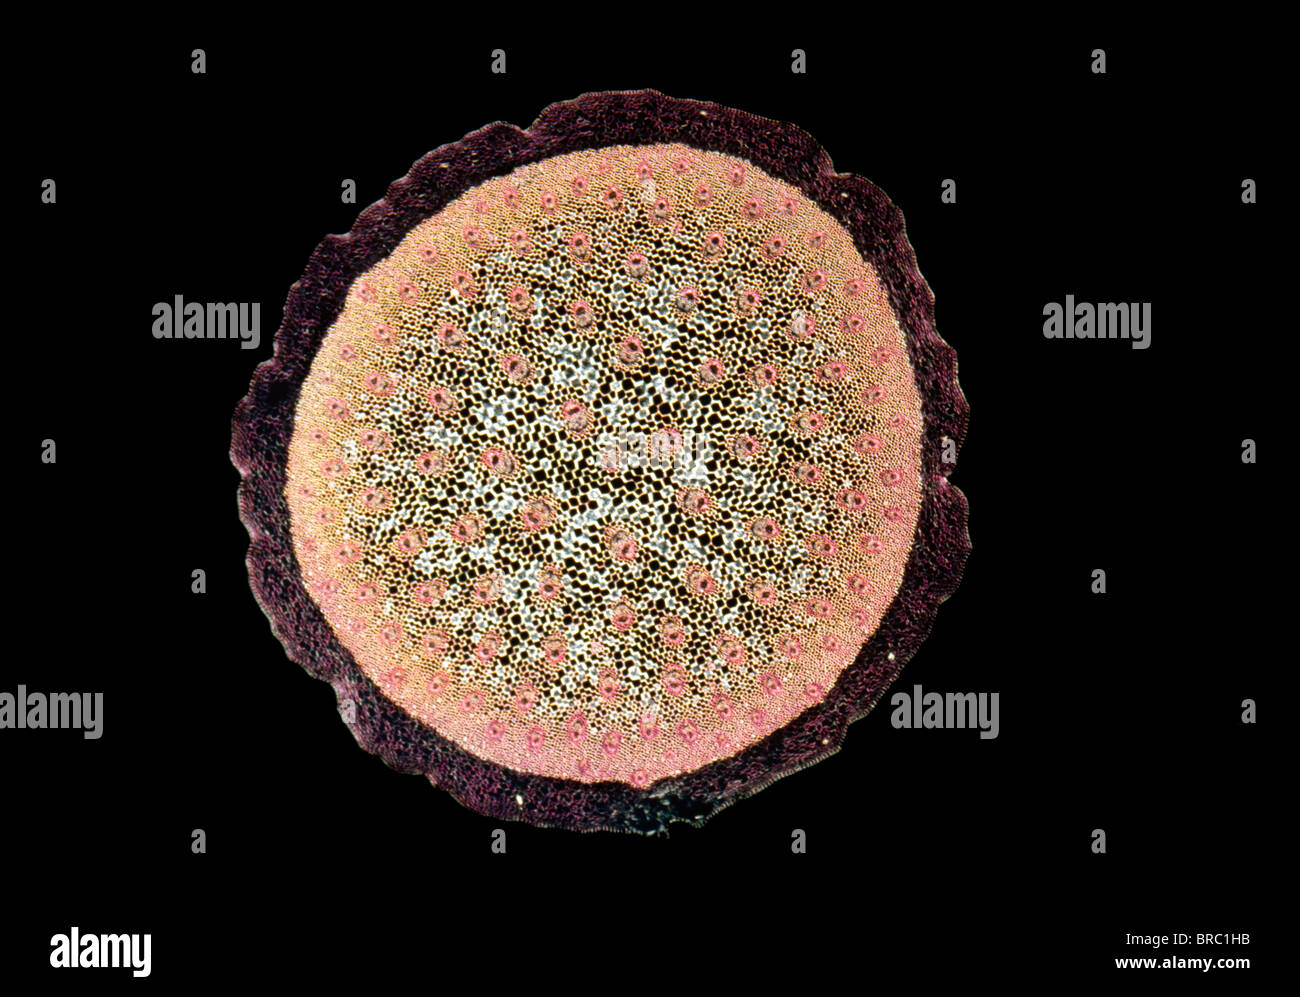 Light Micrograph (LM) of a transverse section of a stem of a Monocot (Ruscus aculeatus), magnification x30 Stock Photo